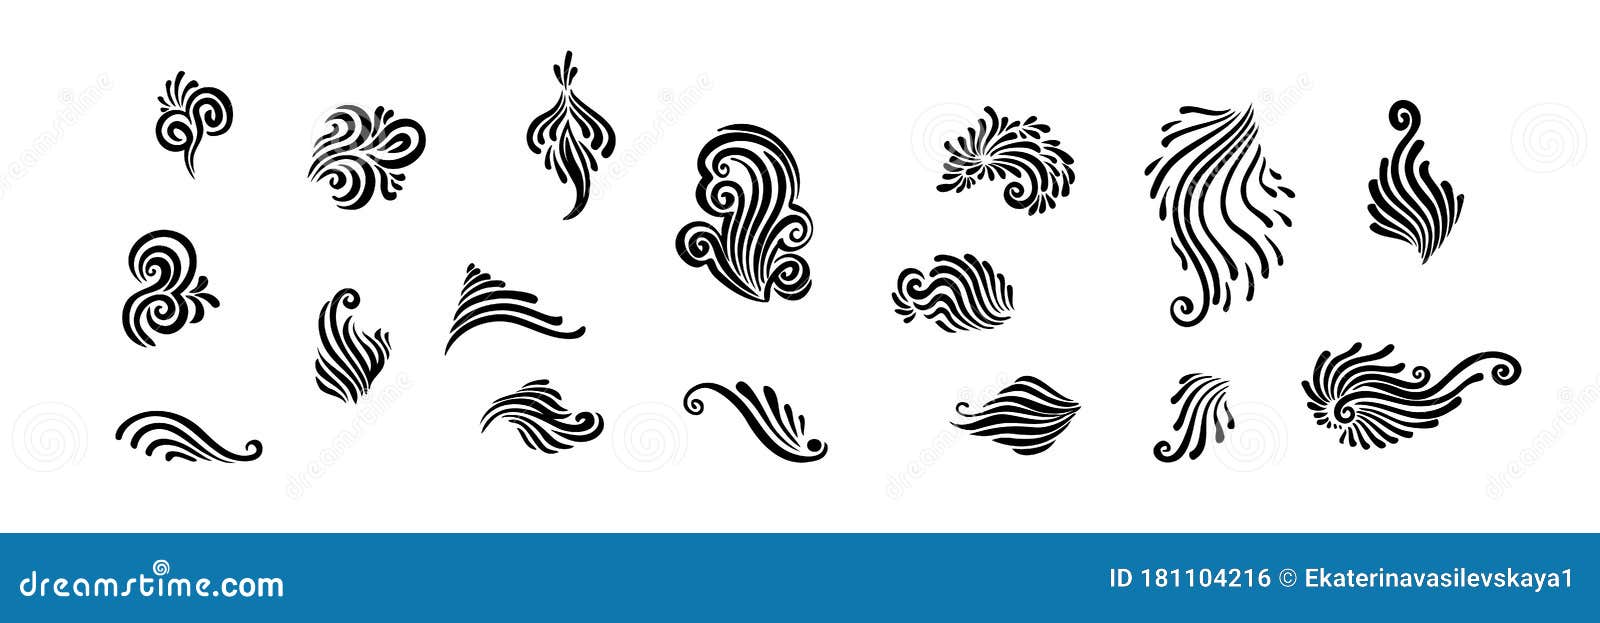 set of simple swooshes decorative s. hand drawn calligraphy swashes with brush strokes, black   on white